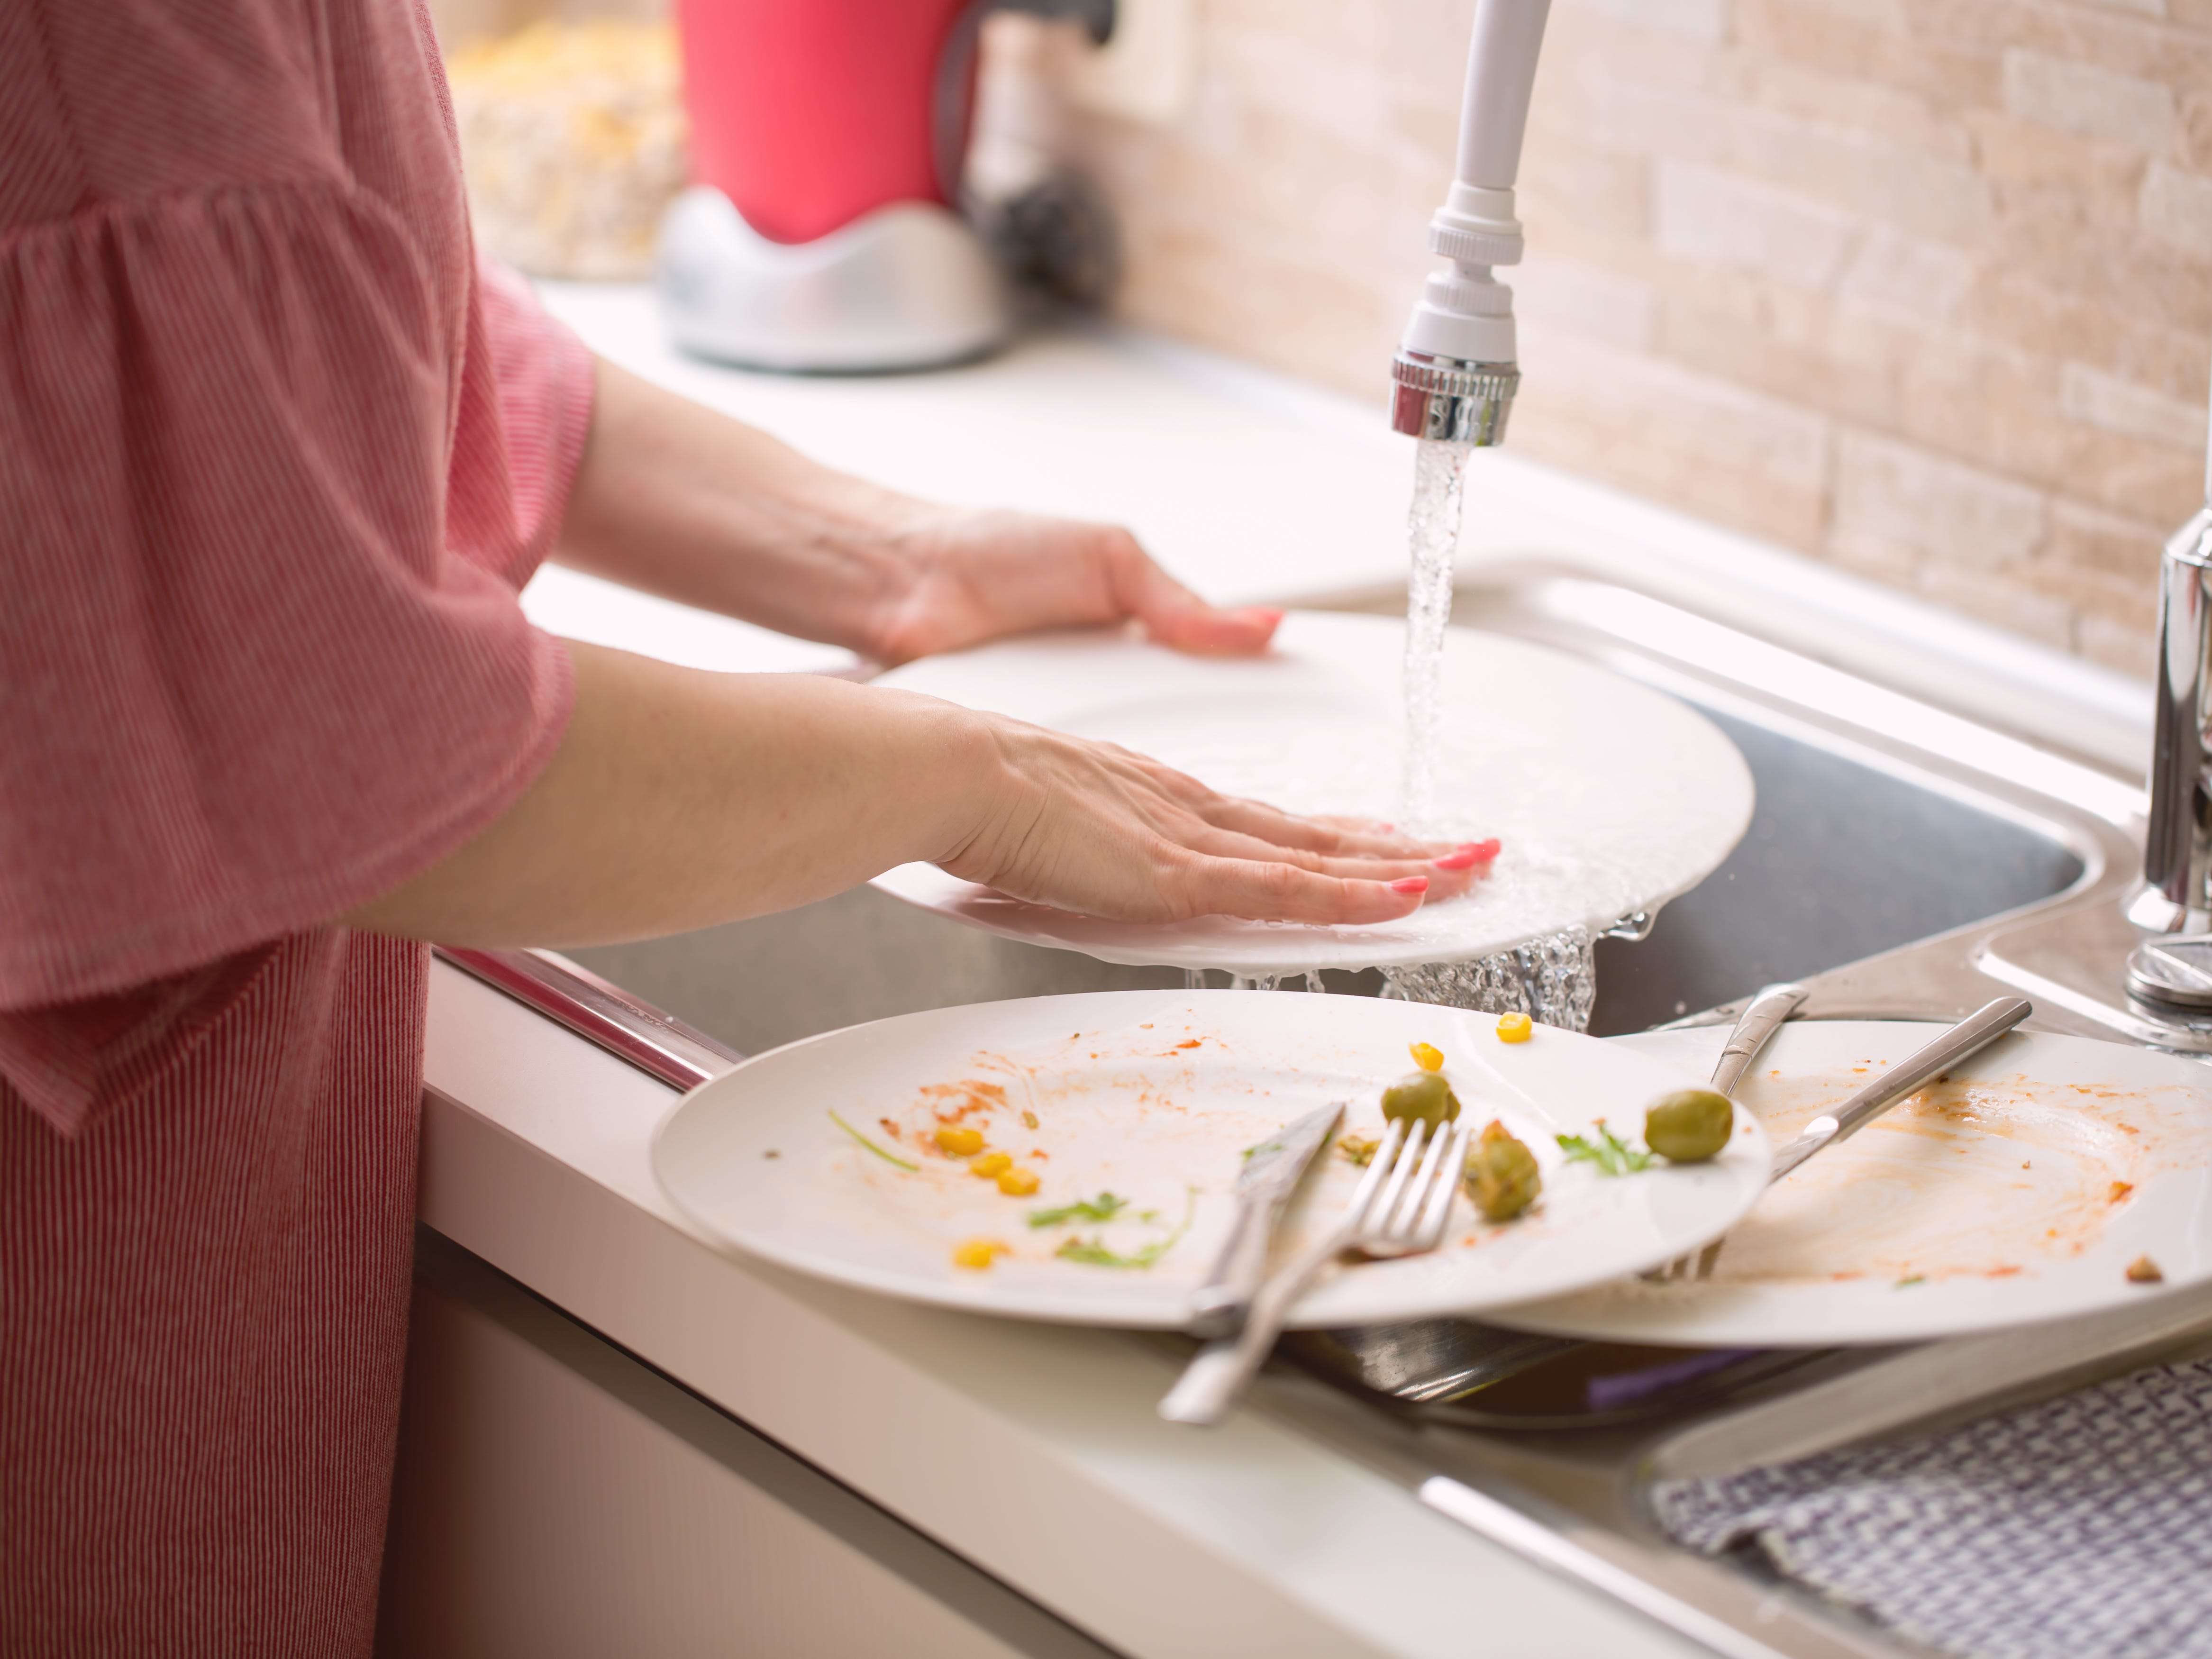 Does dish soap kill germs? Here's the best way to clean your dishes